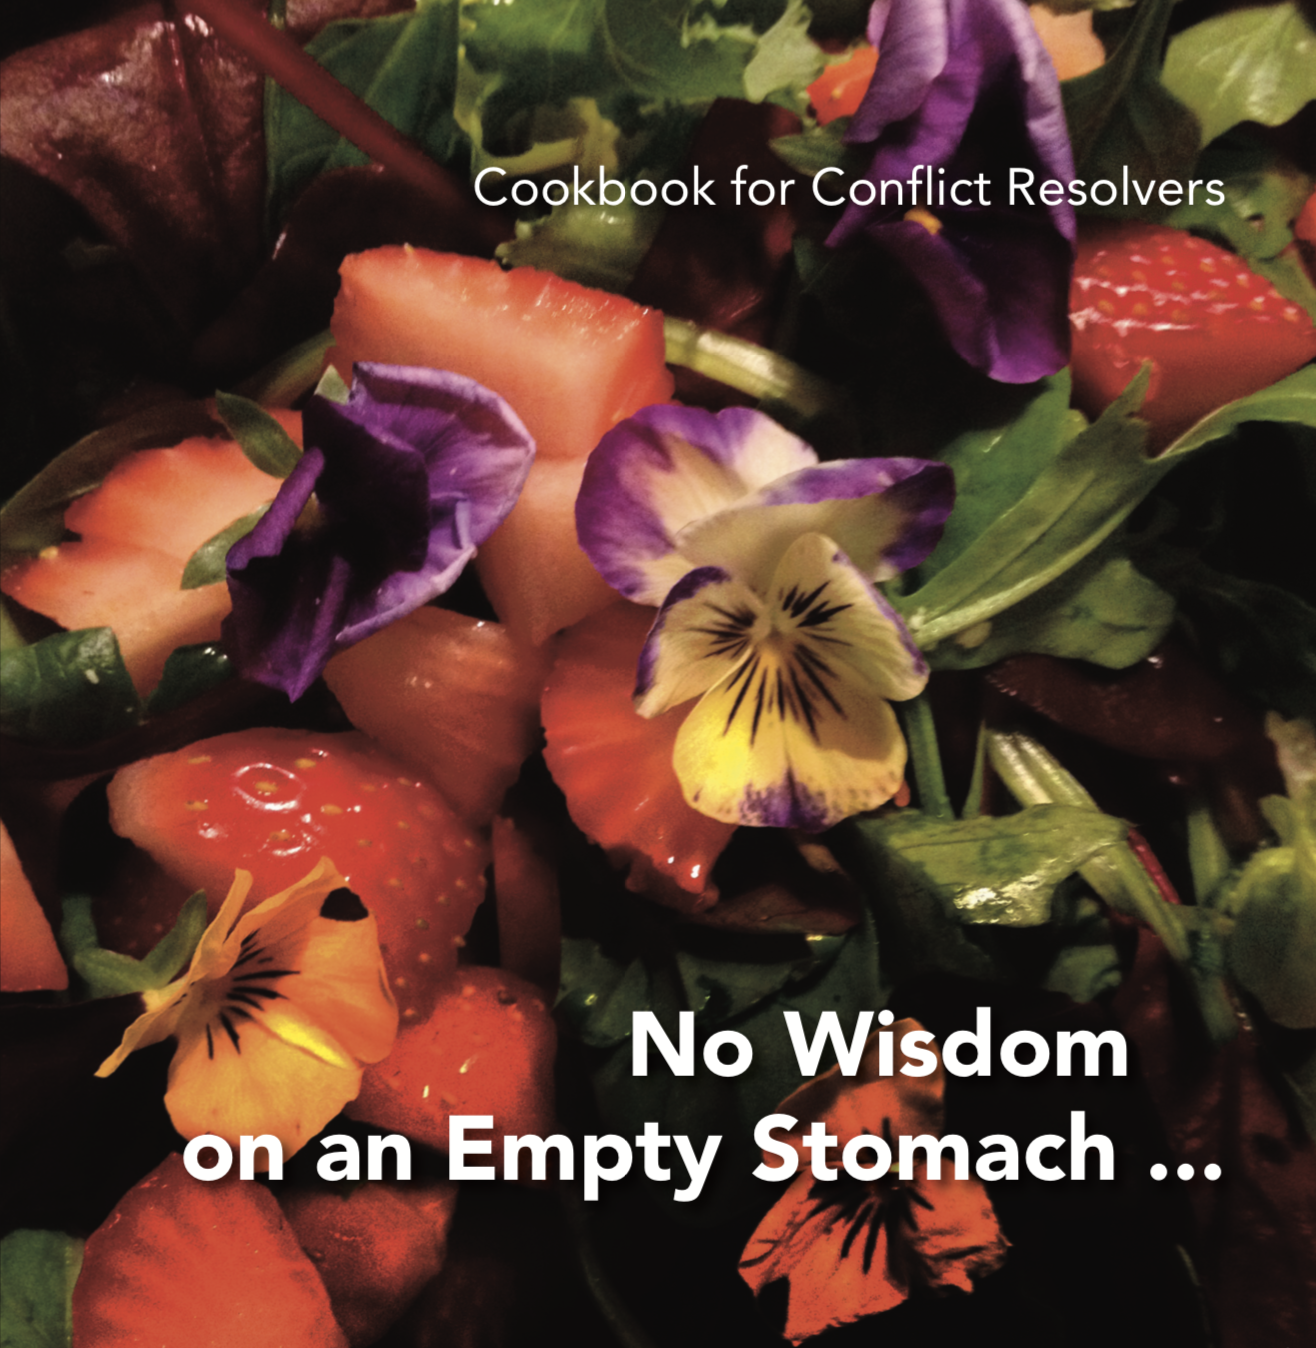 Cookbook for Conflict Resolvers 1 – No Wisdom on an Empty Stomach